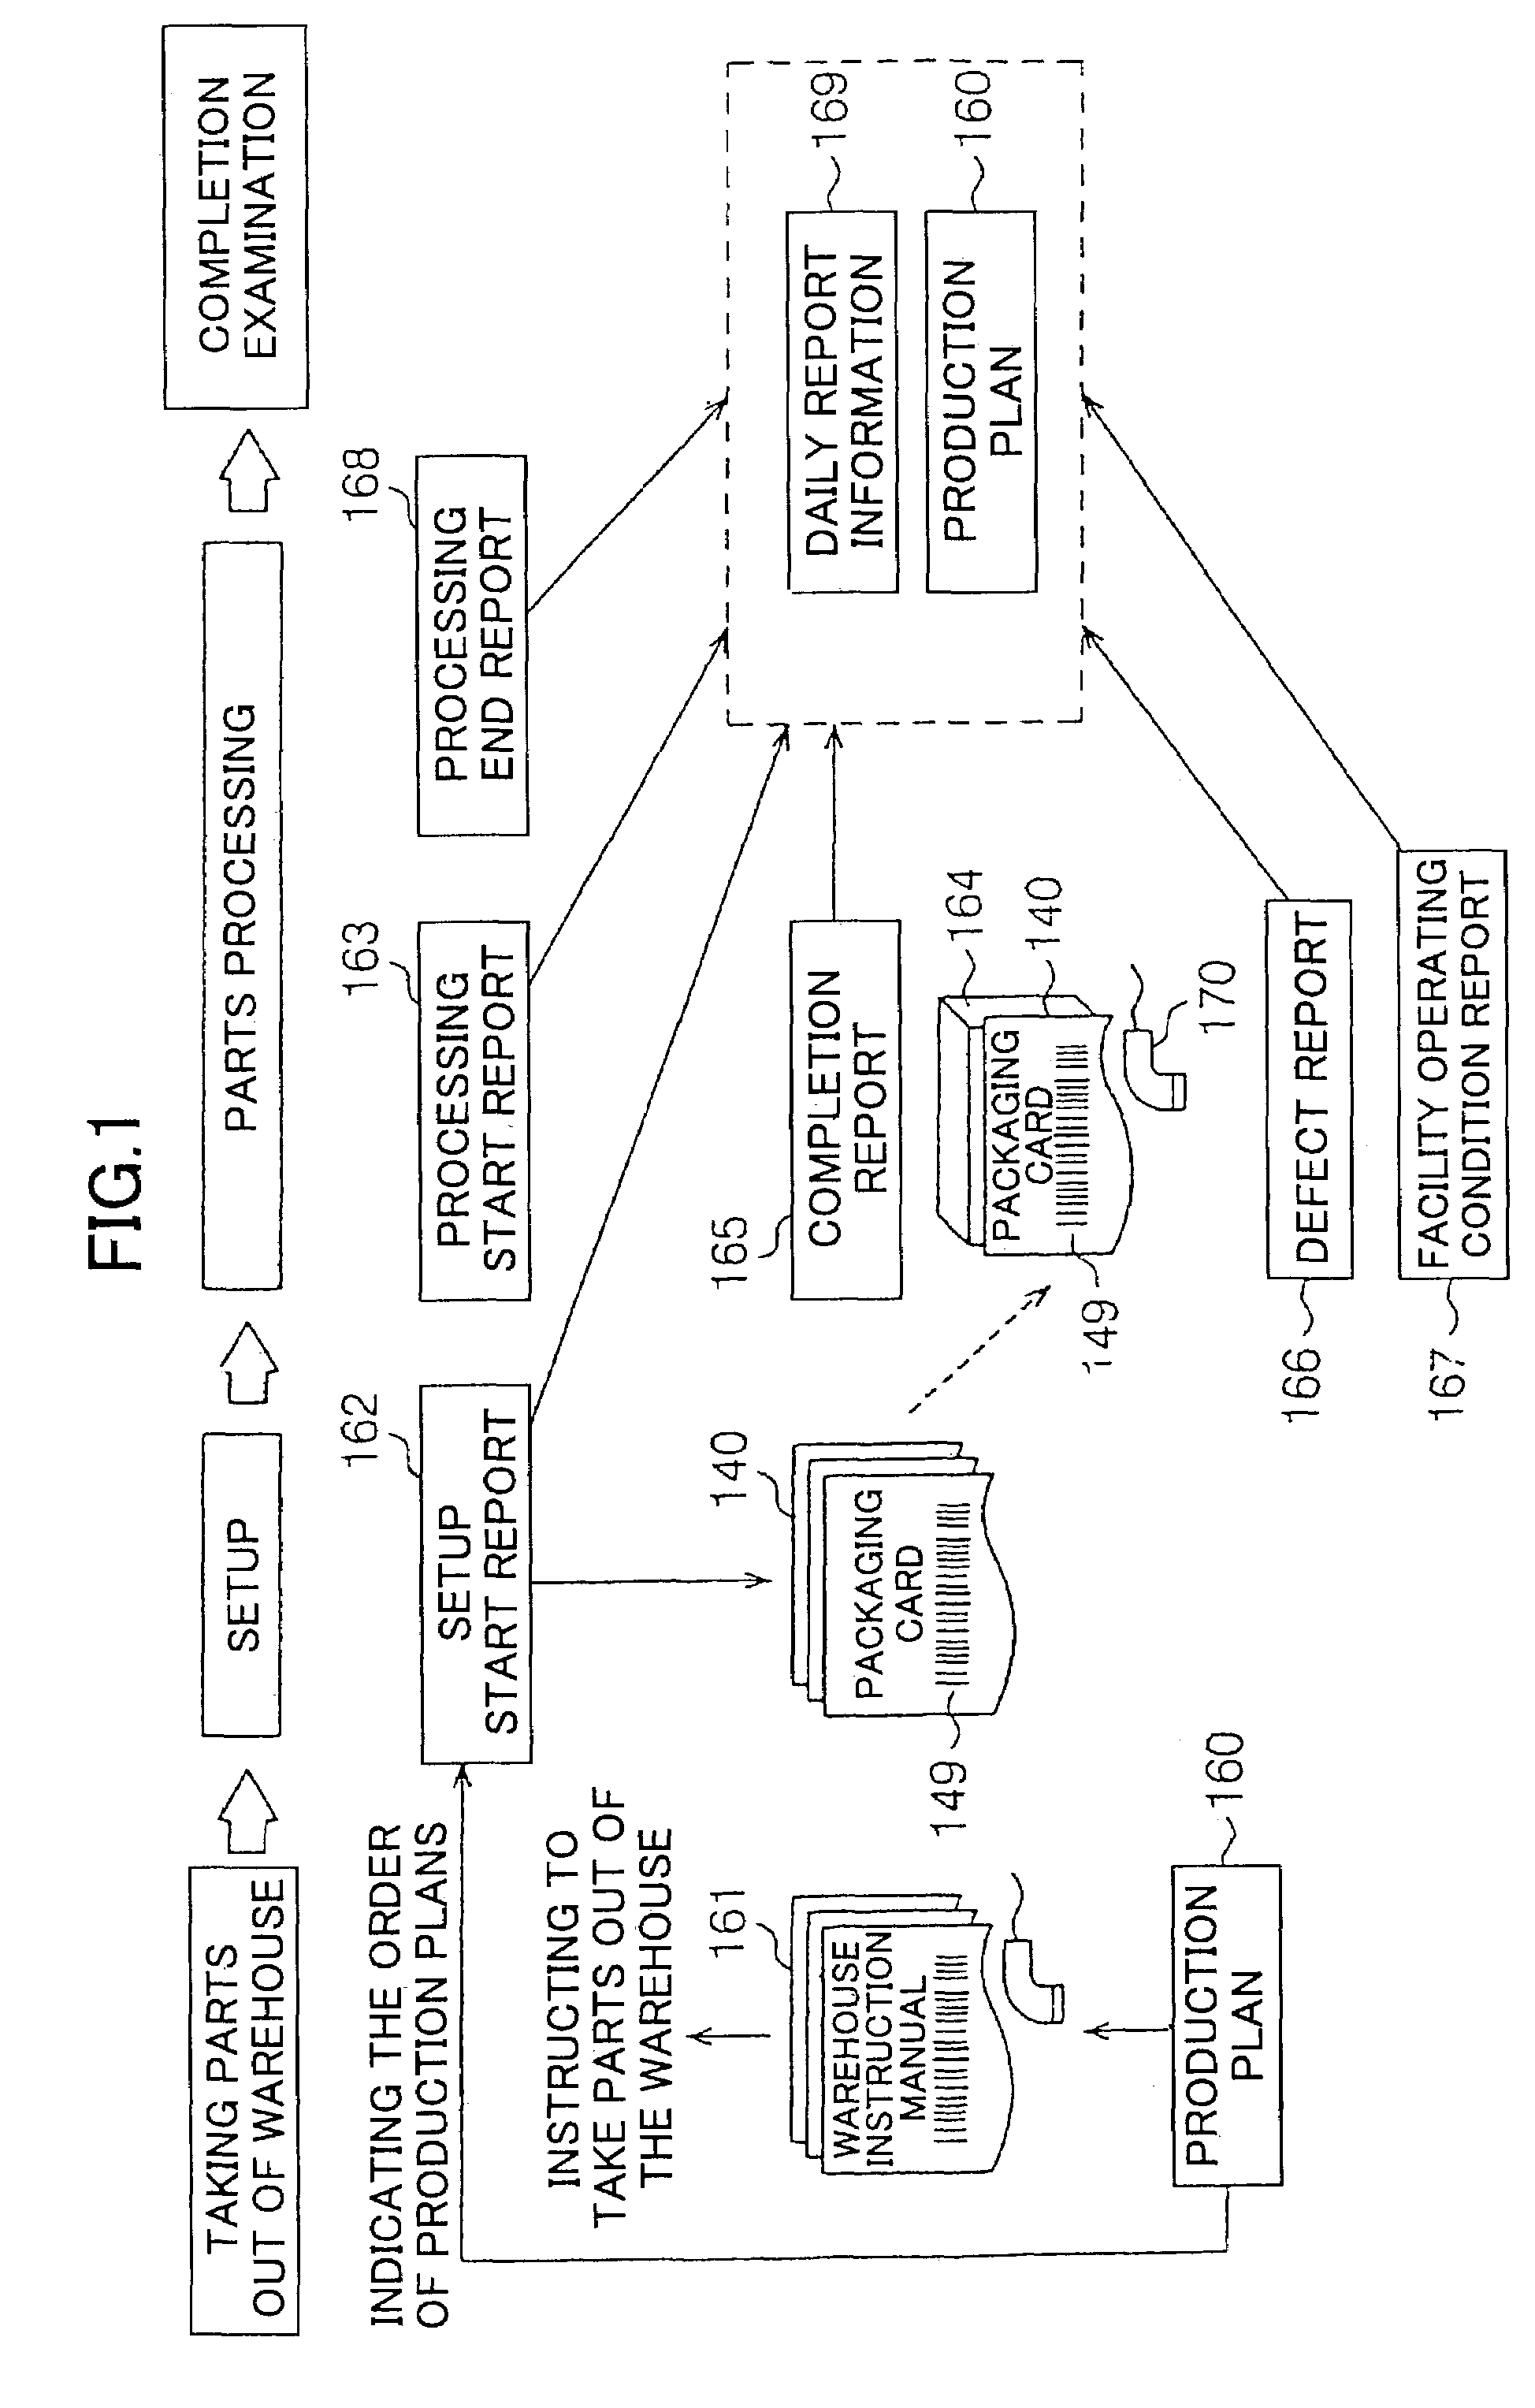 Method of controlling parts processing stages, and program to control parts processing stages